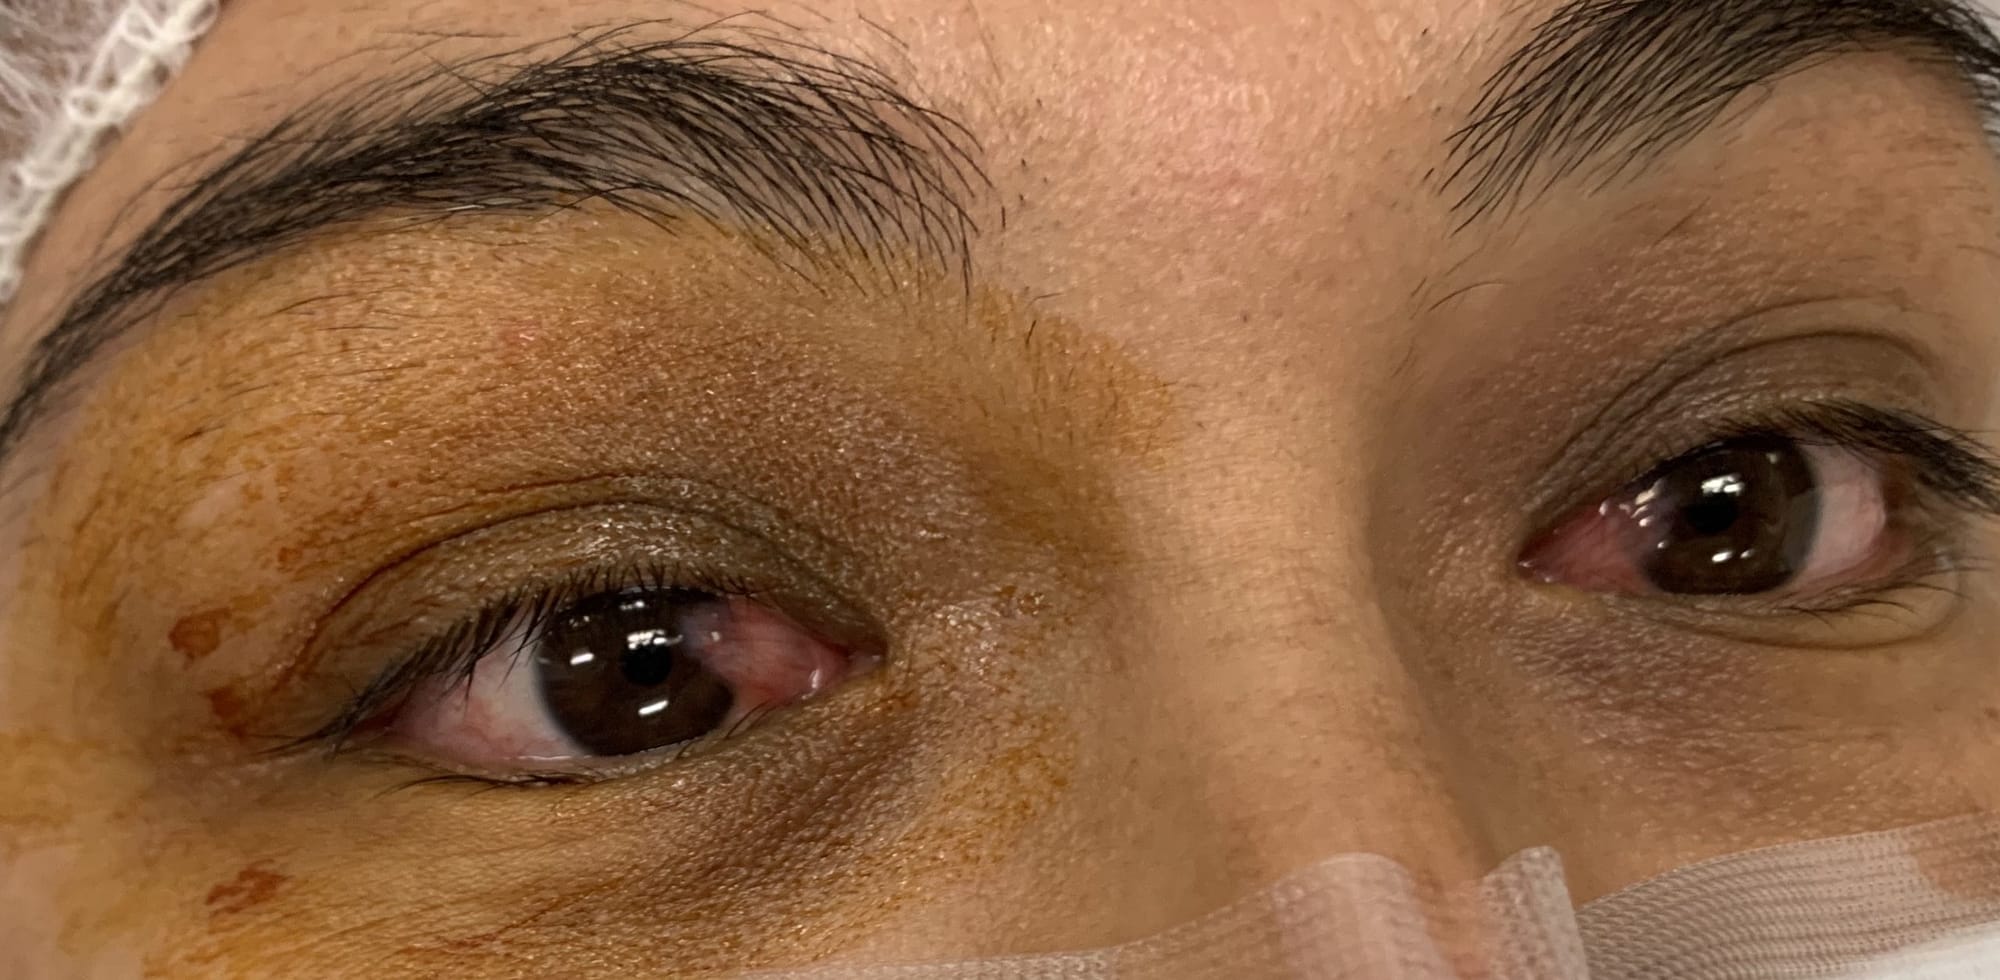 Bilateral Pterygium in a young lady being prepped for surgery